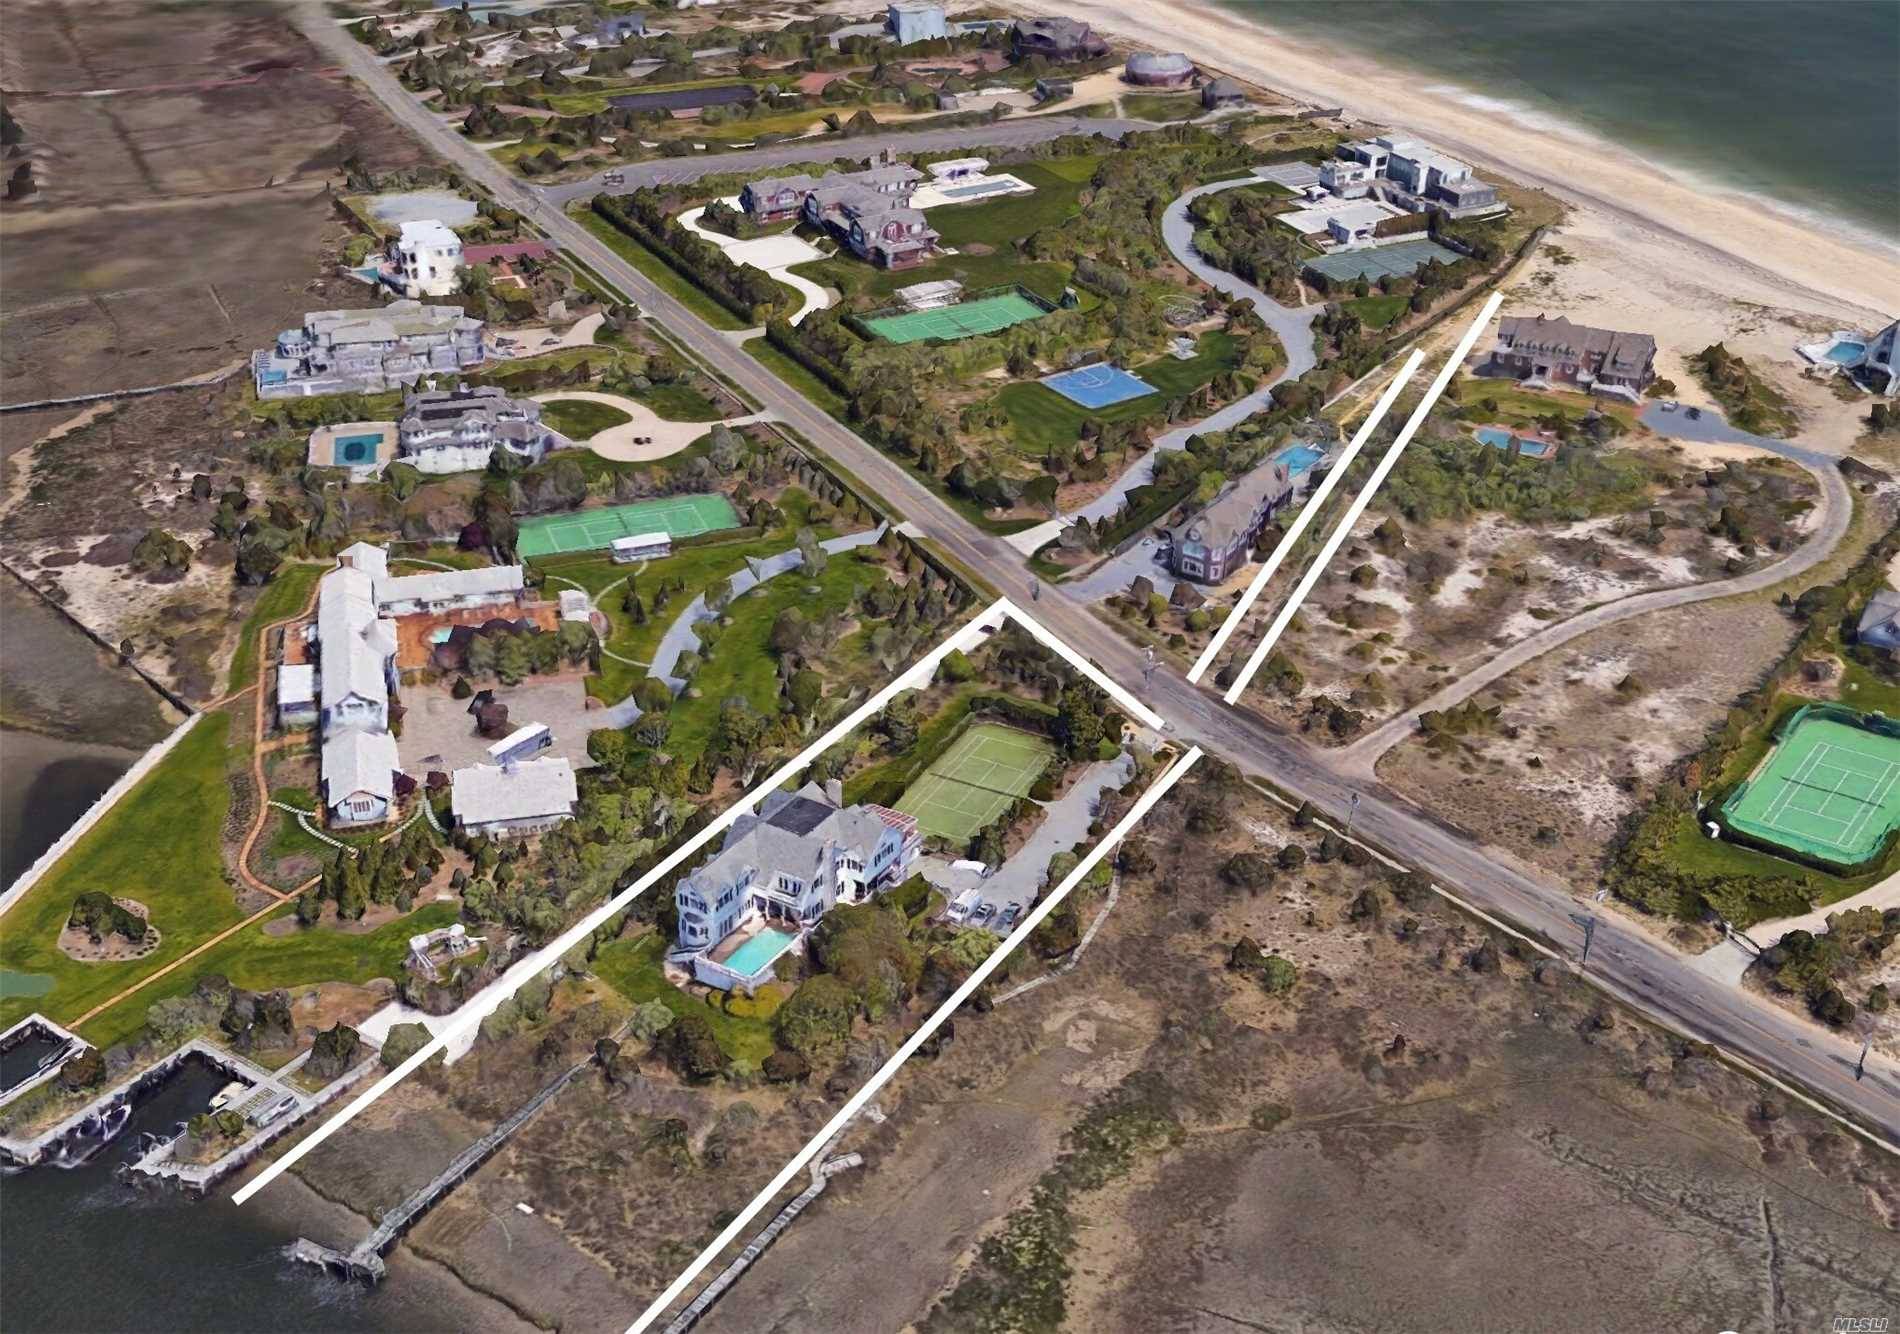 Chic Beach Chateau W/Sunset Views Across Quantuck Bay To The Quogue Field Club.